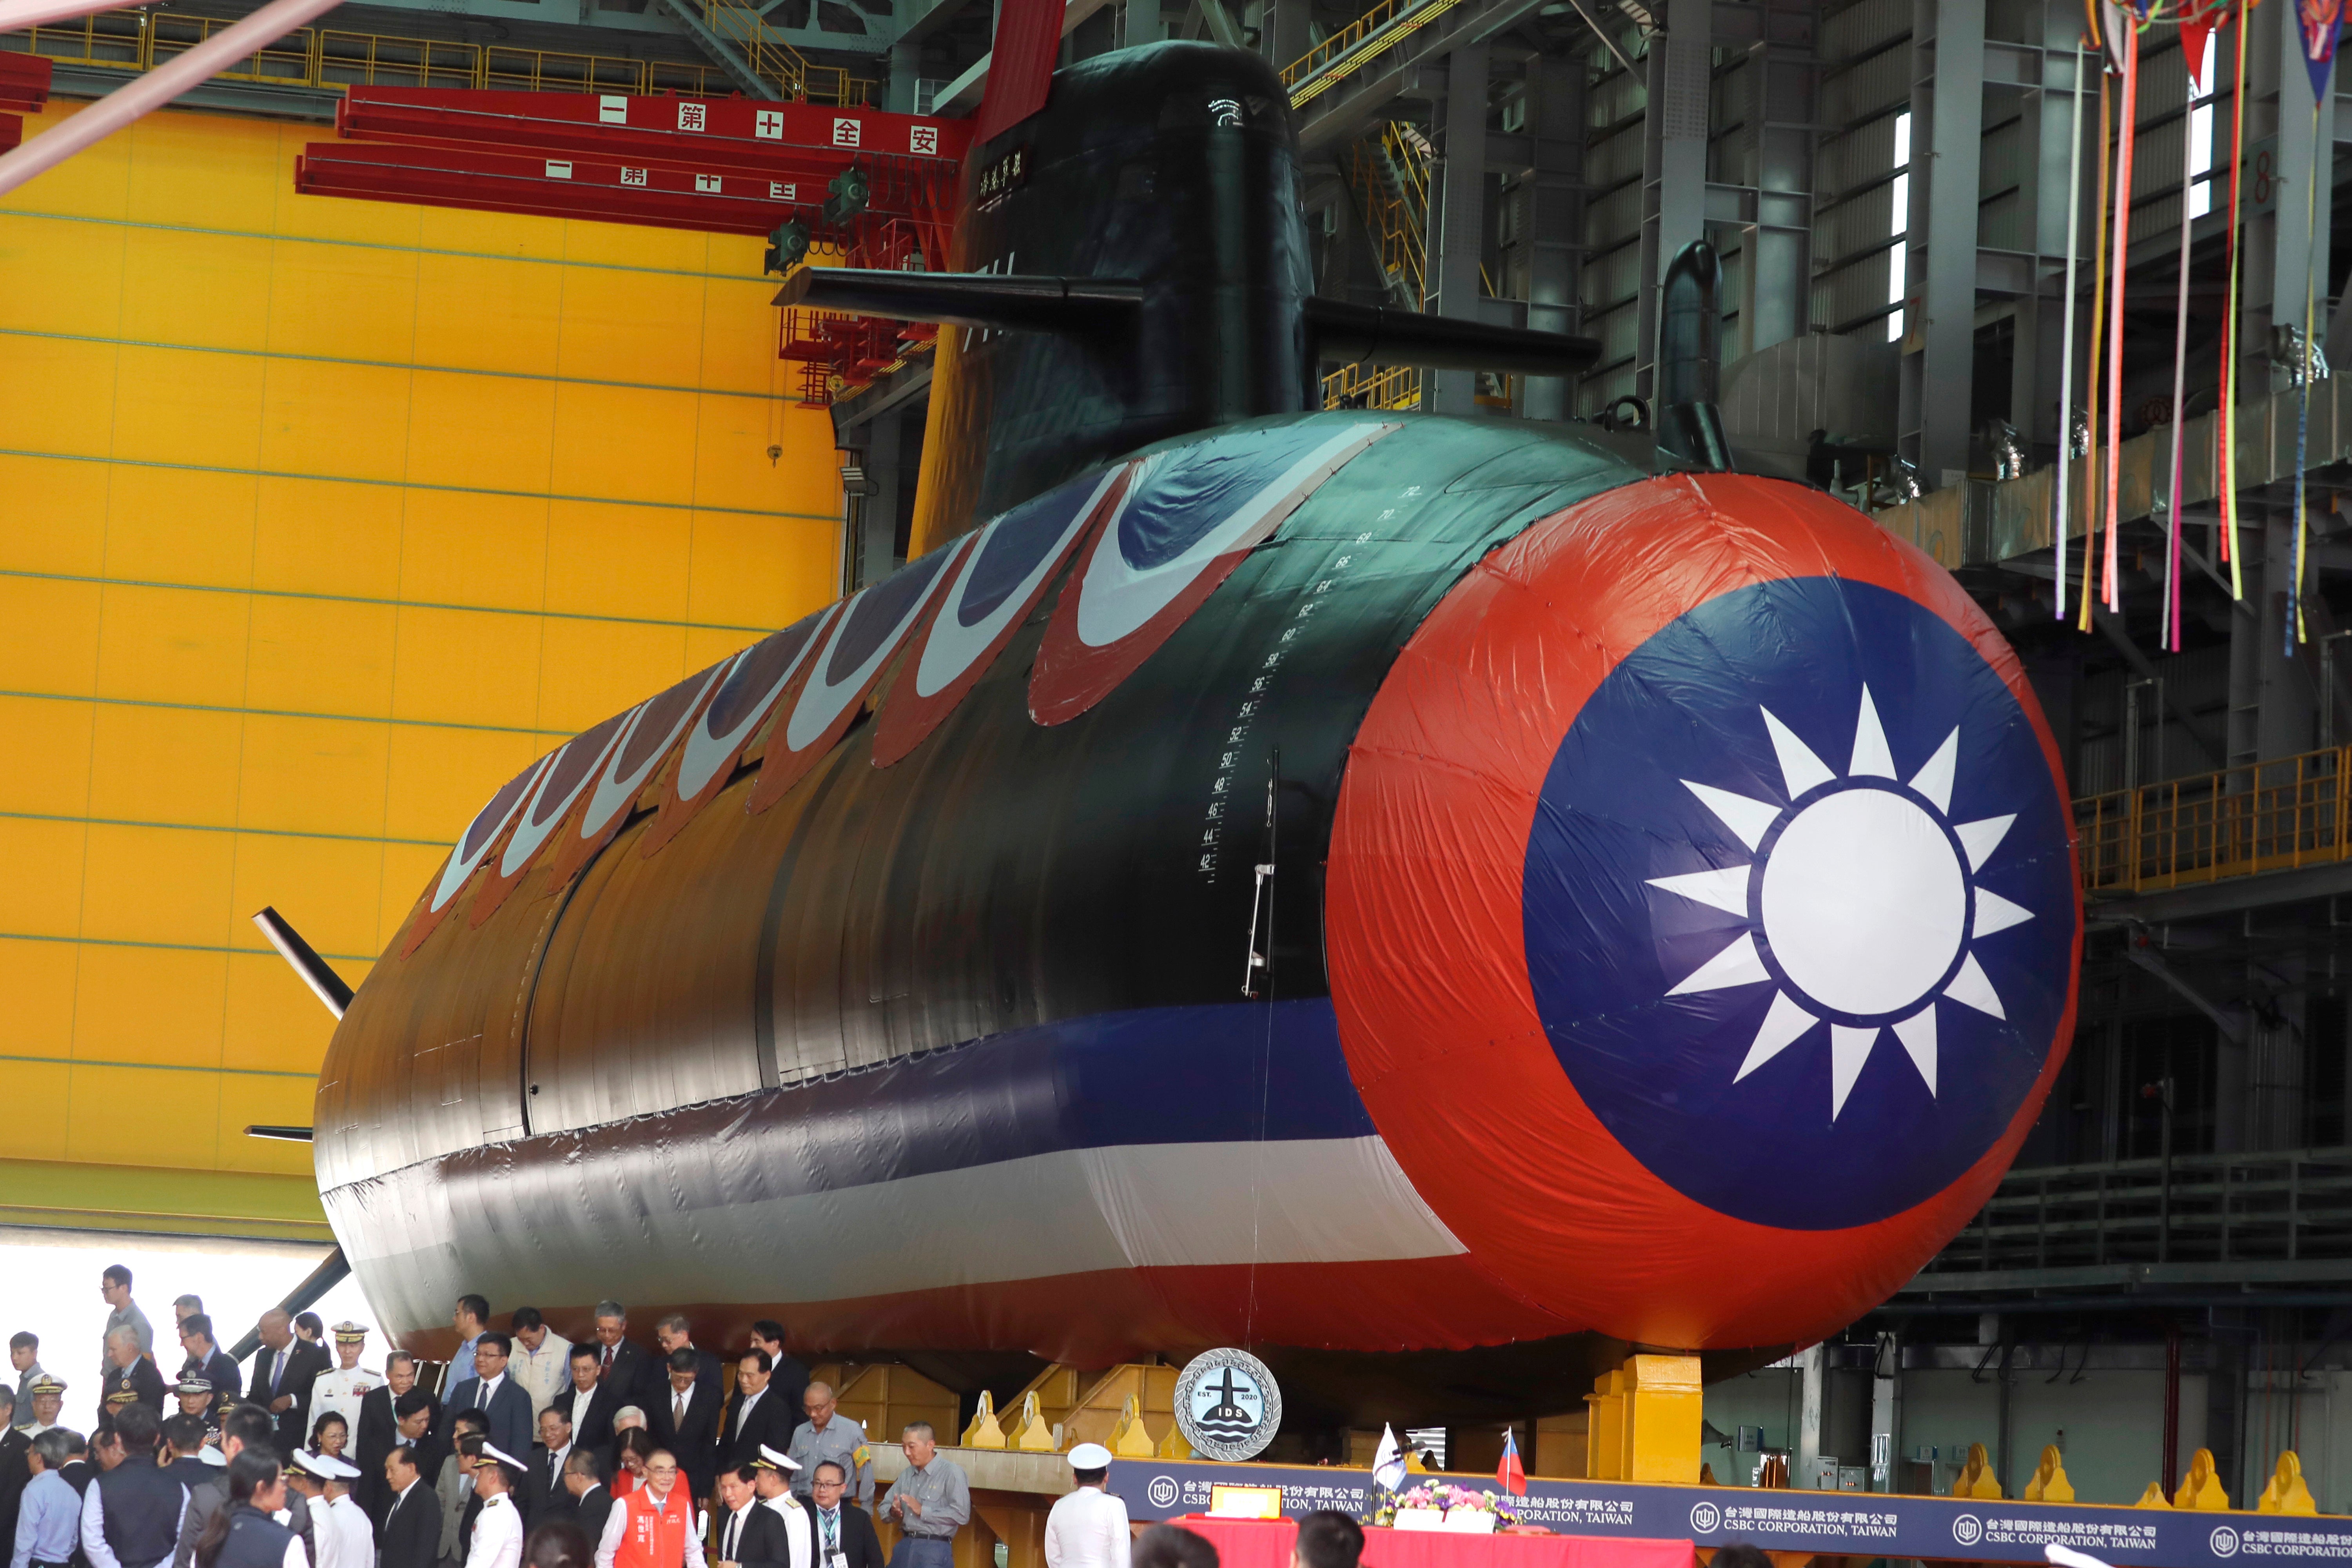 Taiwan's domestically-made submarine during the naming and launching ceremony